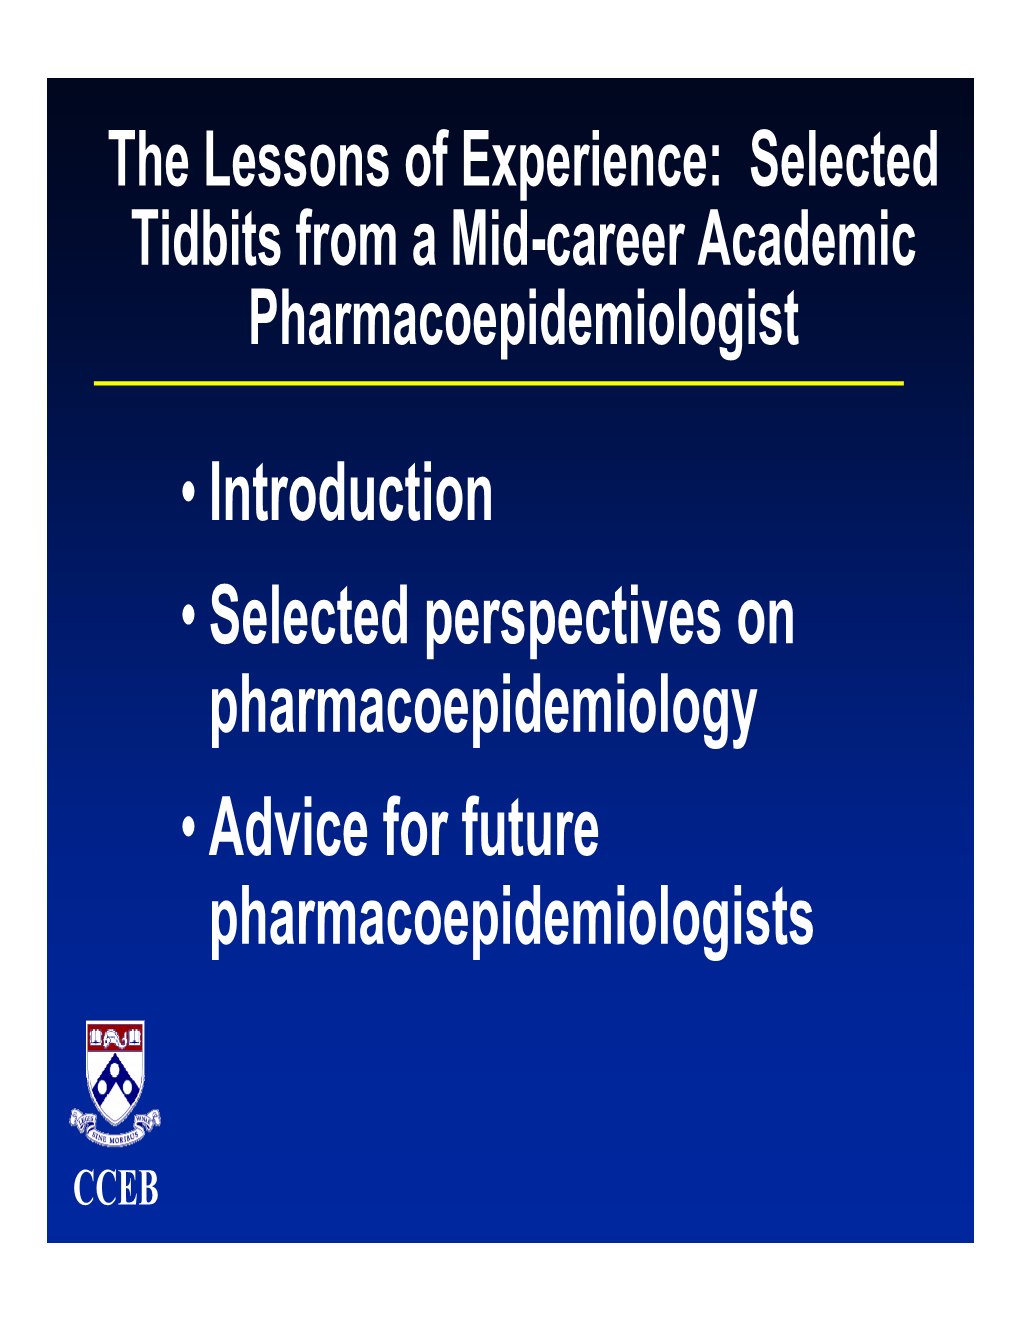 The Lessons of Experience: Selected Tidbits from a Mid-Career Academic Pharmacoepidemiologist